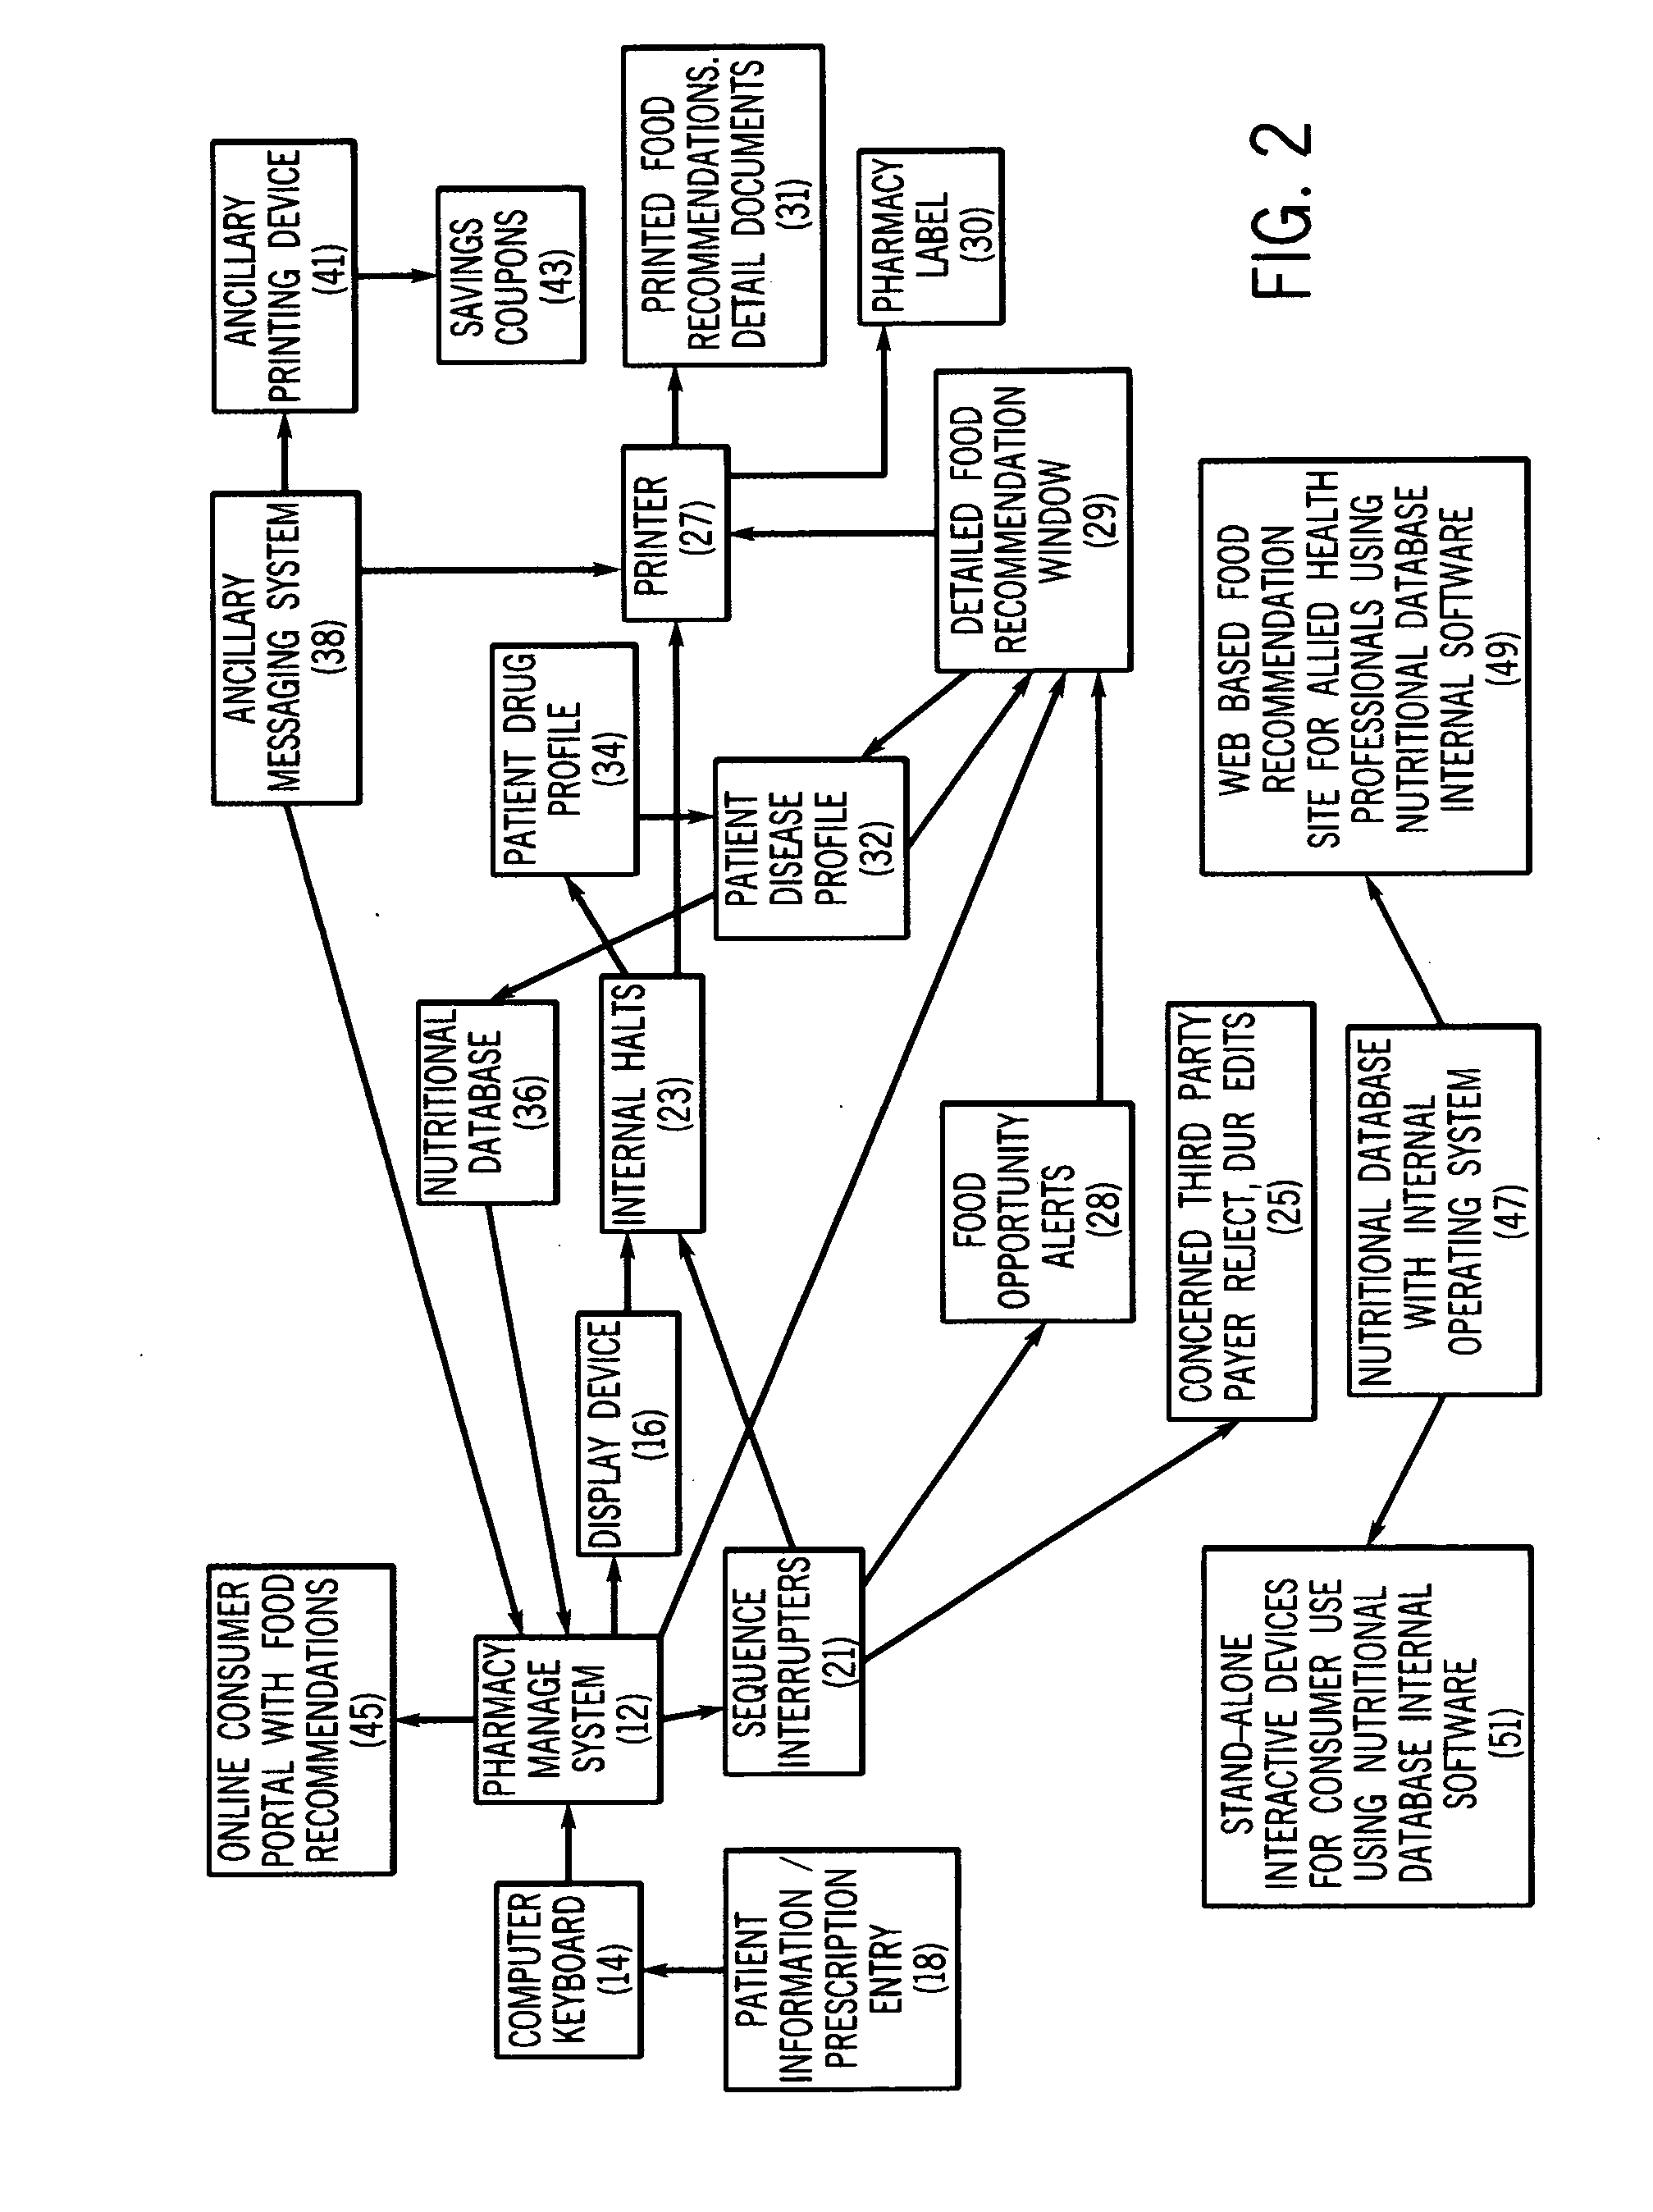 Method and system for generating food recommendations